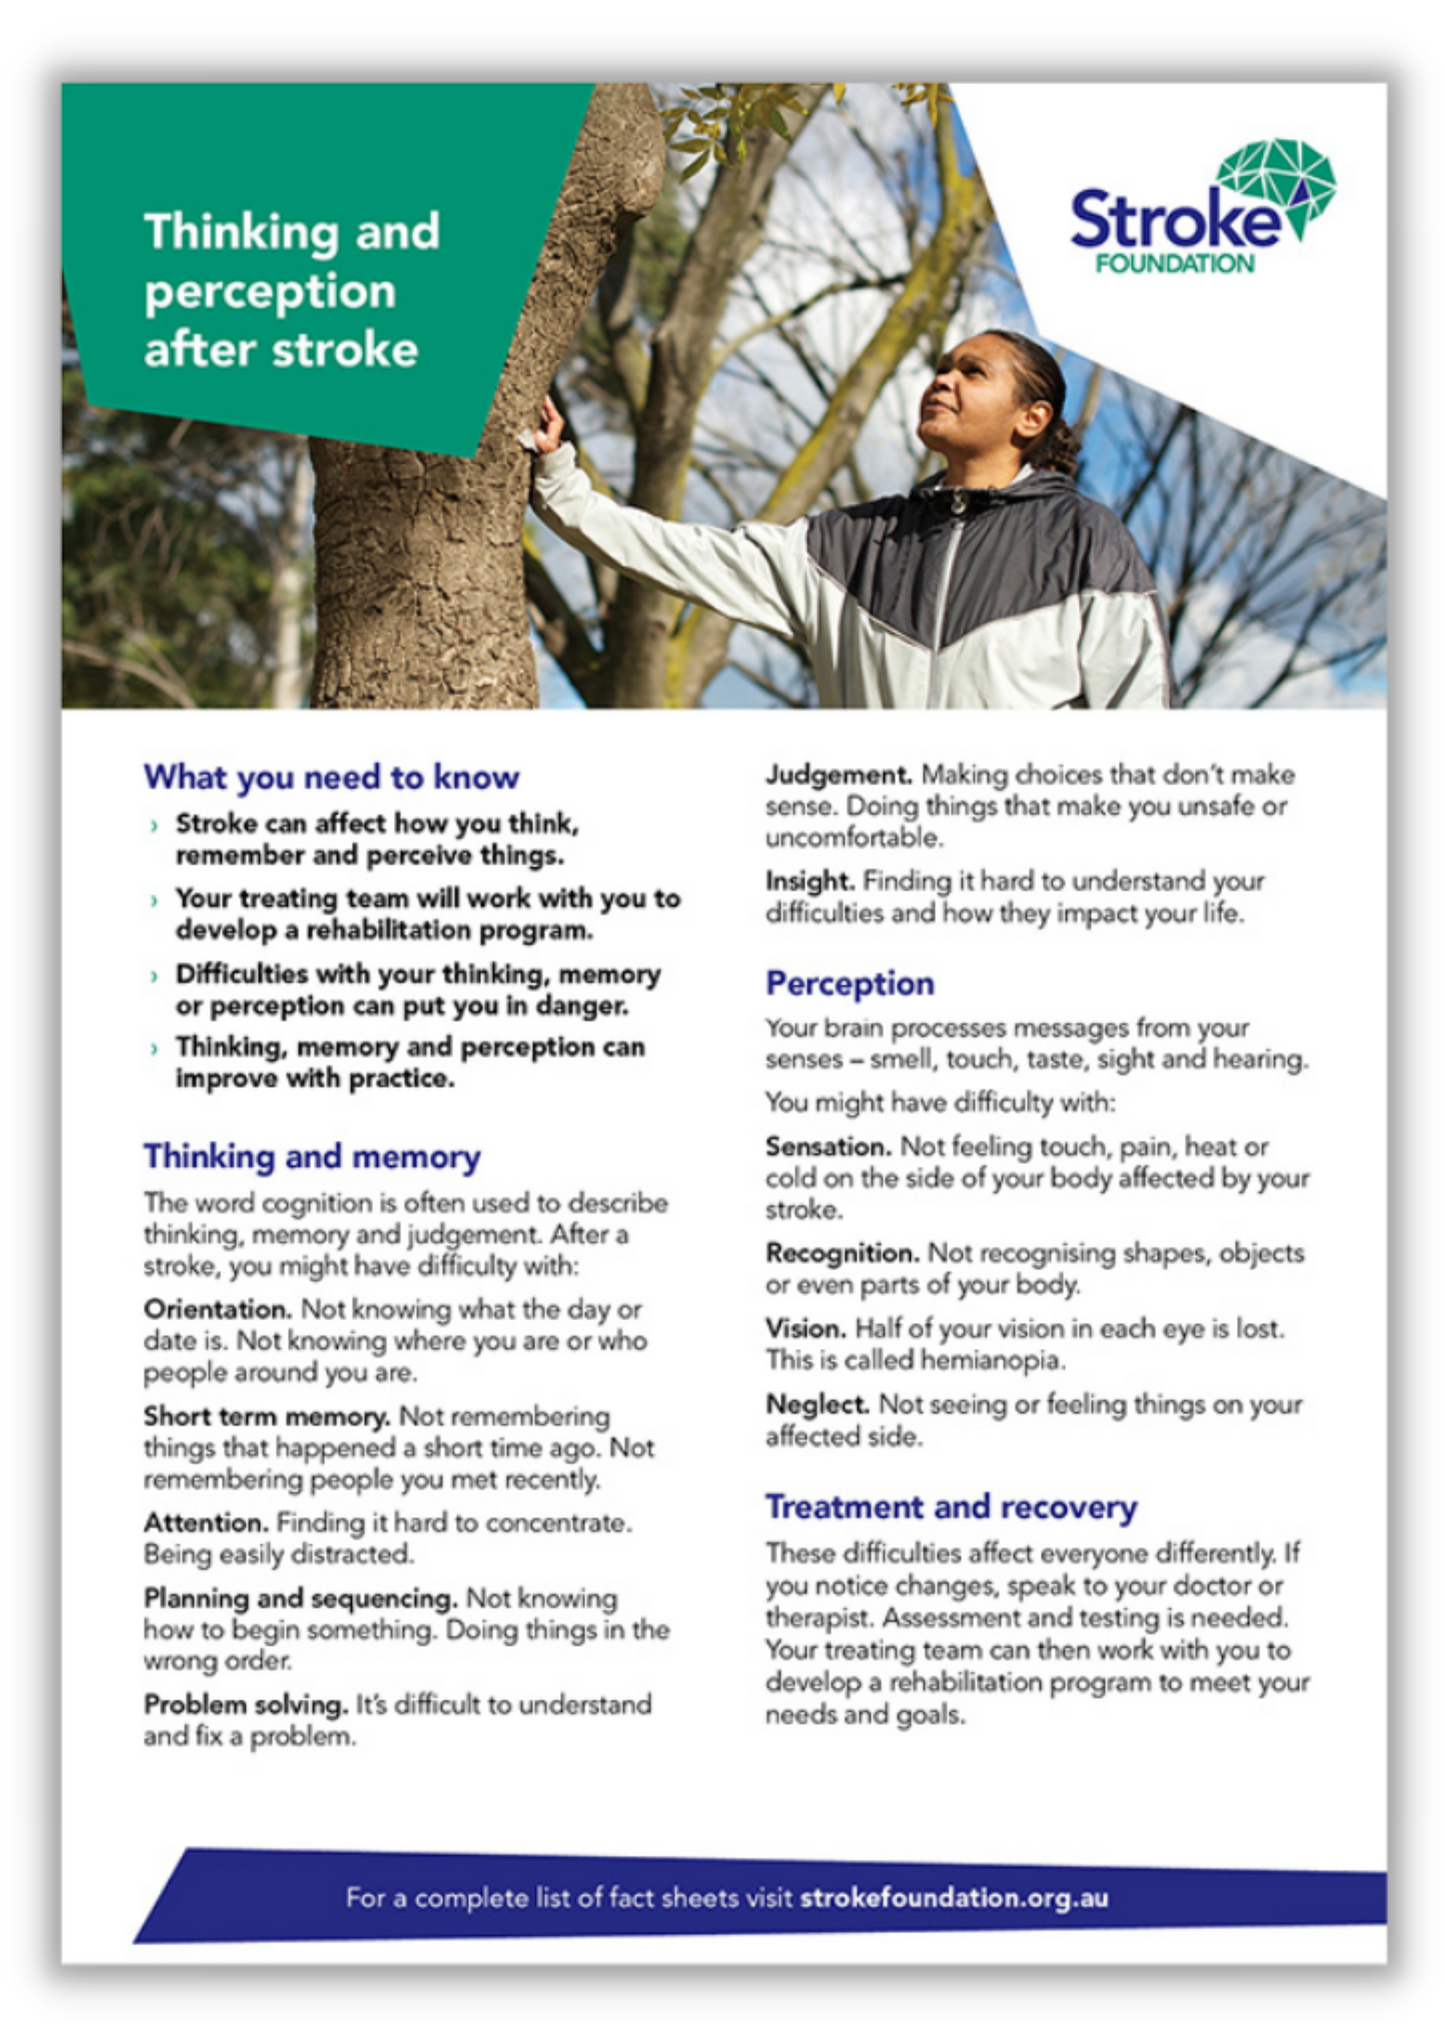 Fact sheet - Thinking and perception after stroke